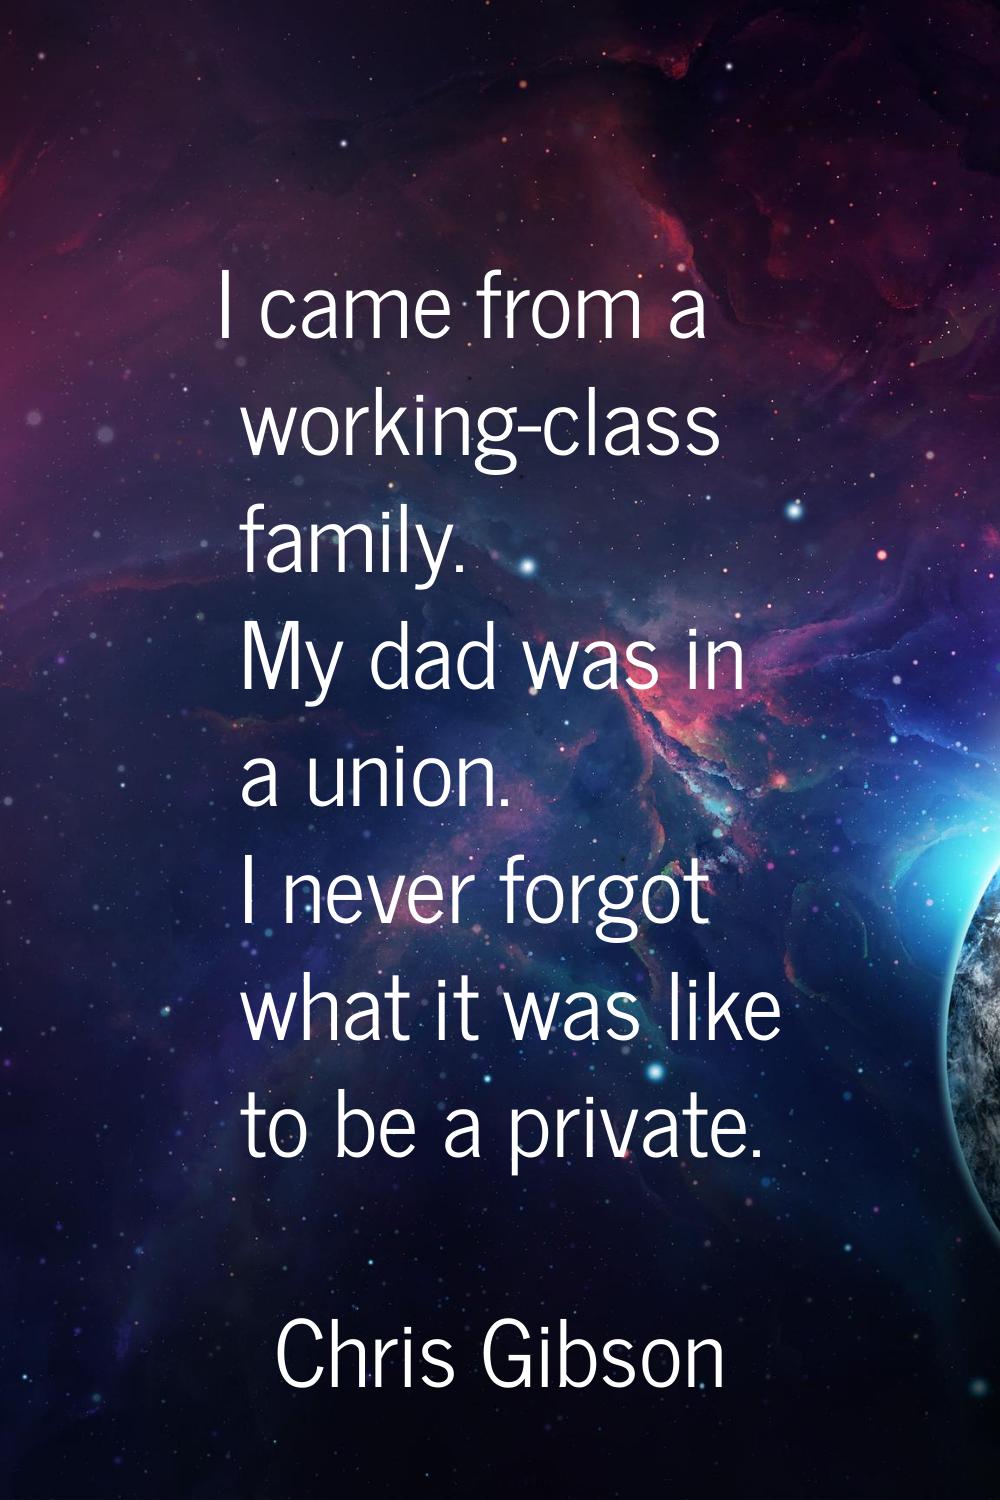 I came from a working-class family. My dad was in a union. I never forgot what it was like to be a 